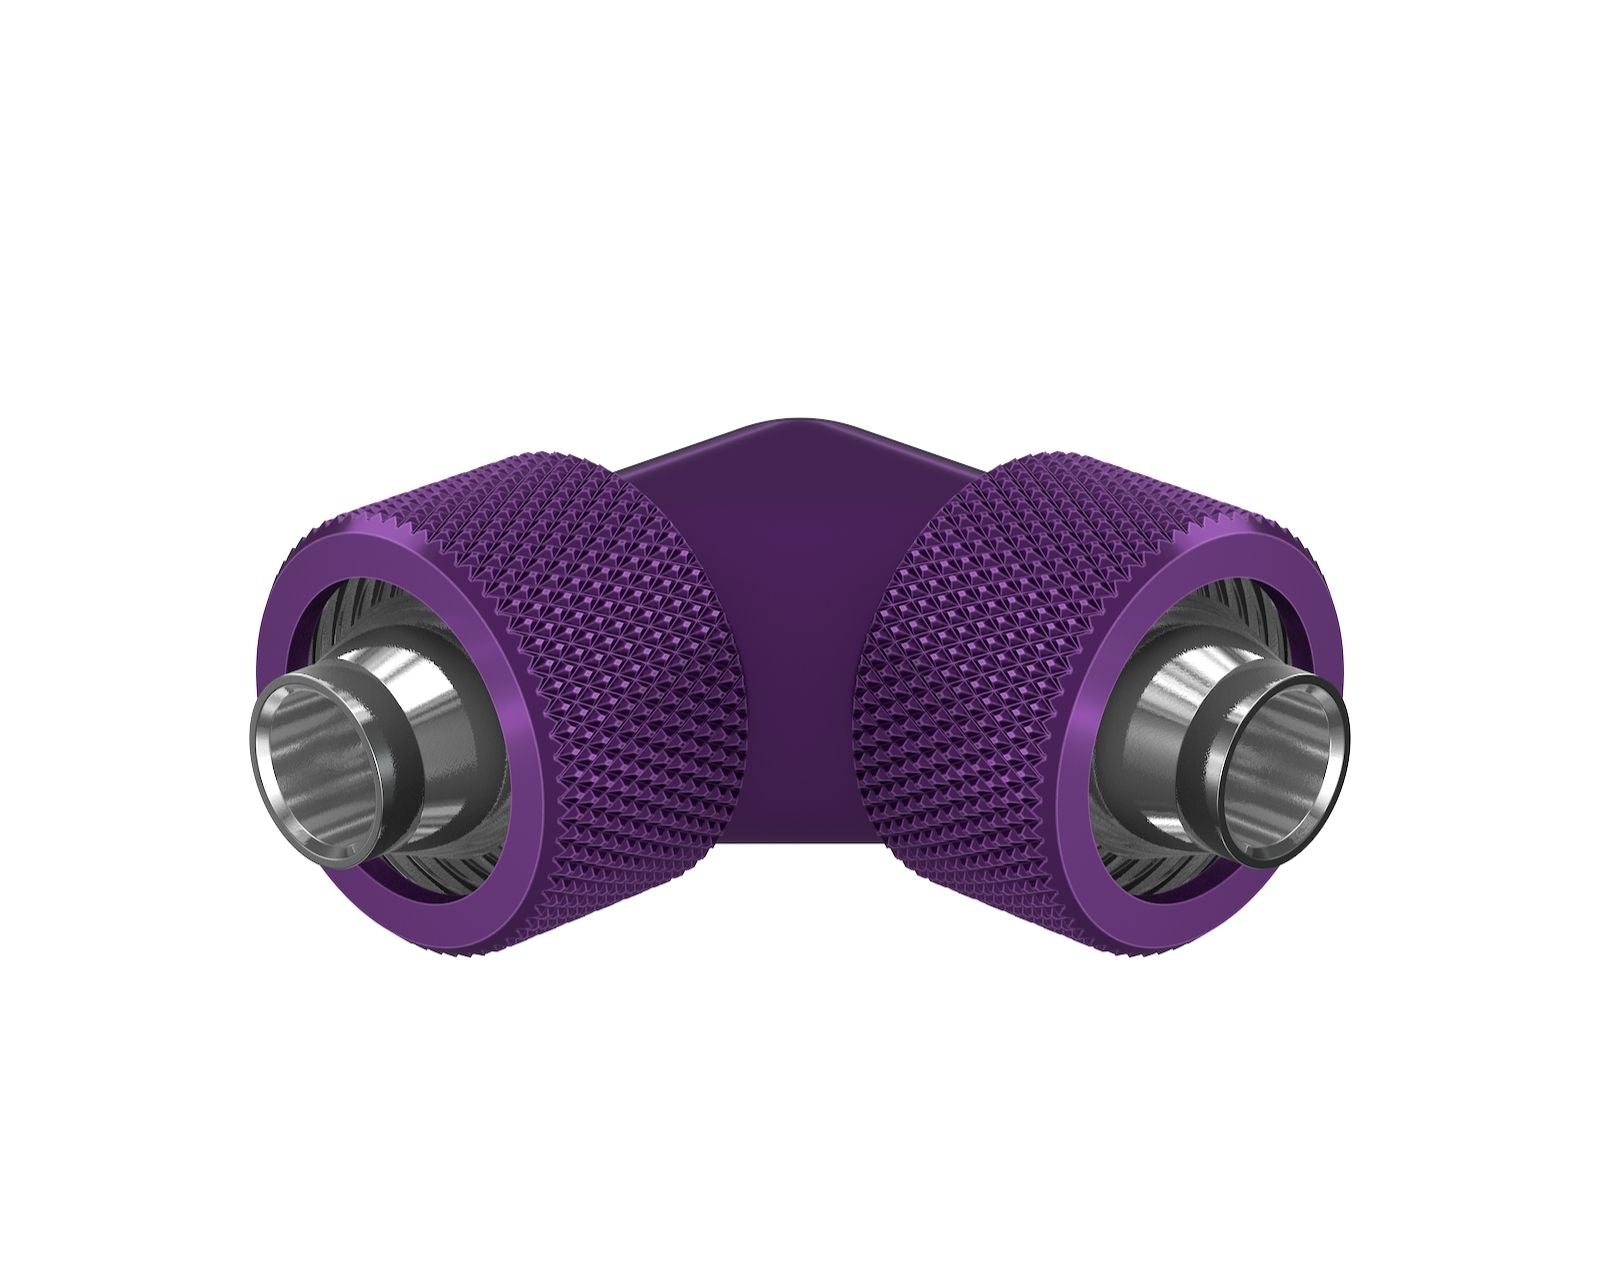 PrimoChill SecureFit SX - Premium 90 Degree Compression Fitting Set For 7/16in ID x 5/8in OD Flexible Tubing (F-SFSX75890) - Available in 20+ Colors, Custom Watercooling Loop Ready - Candy Purple